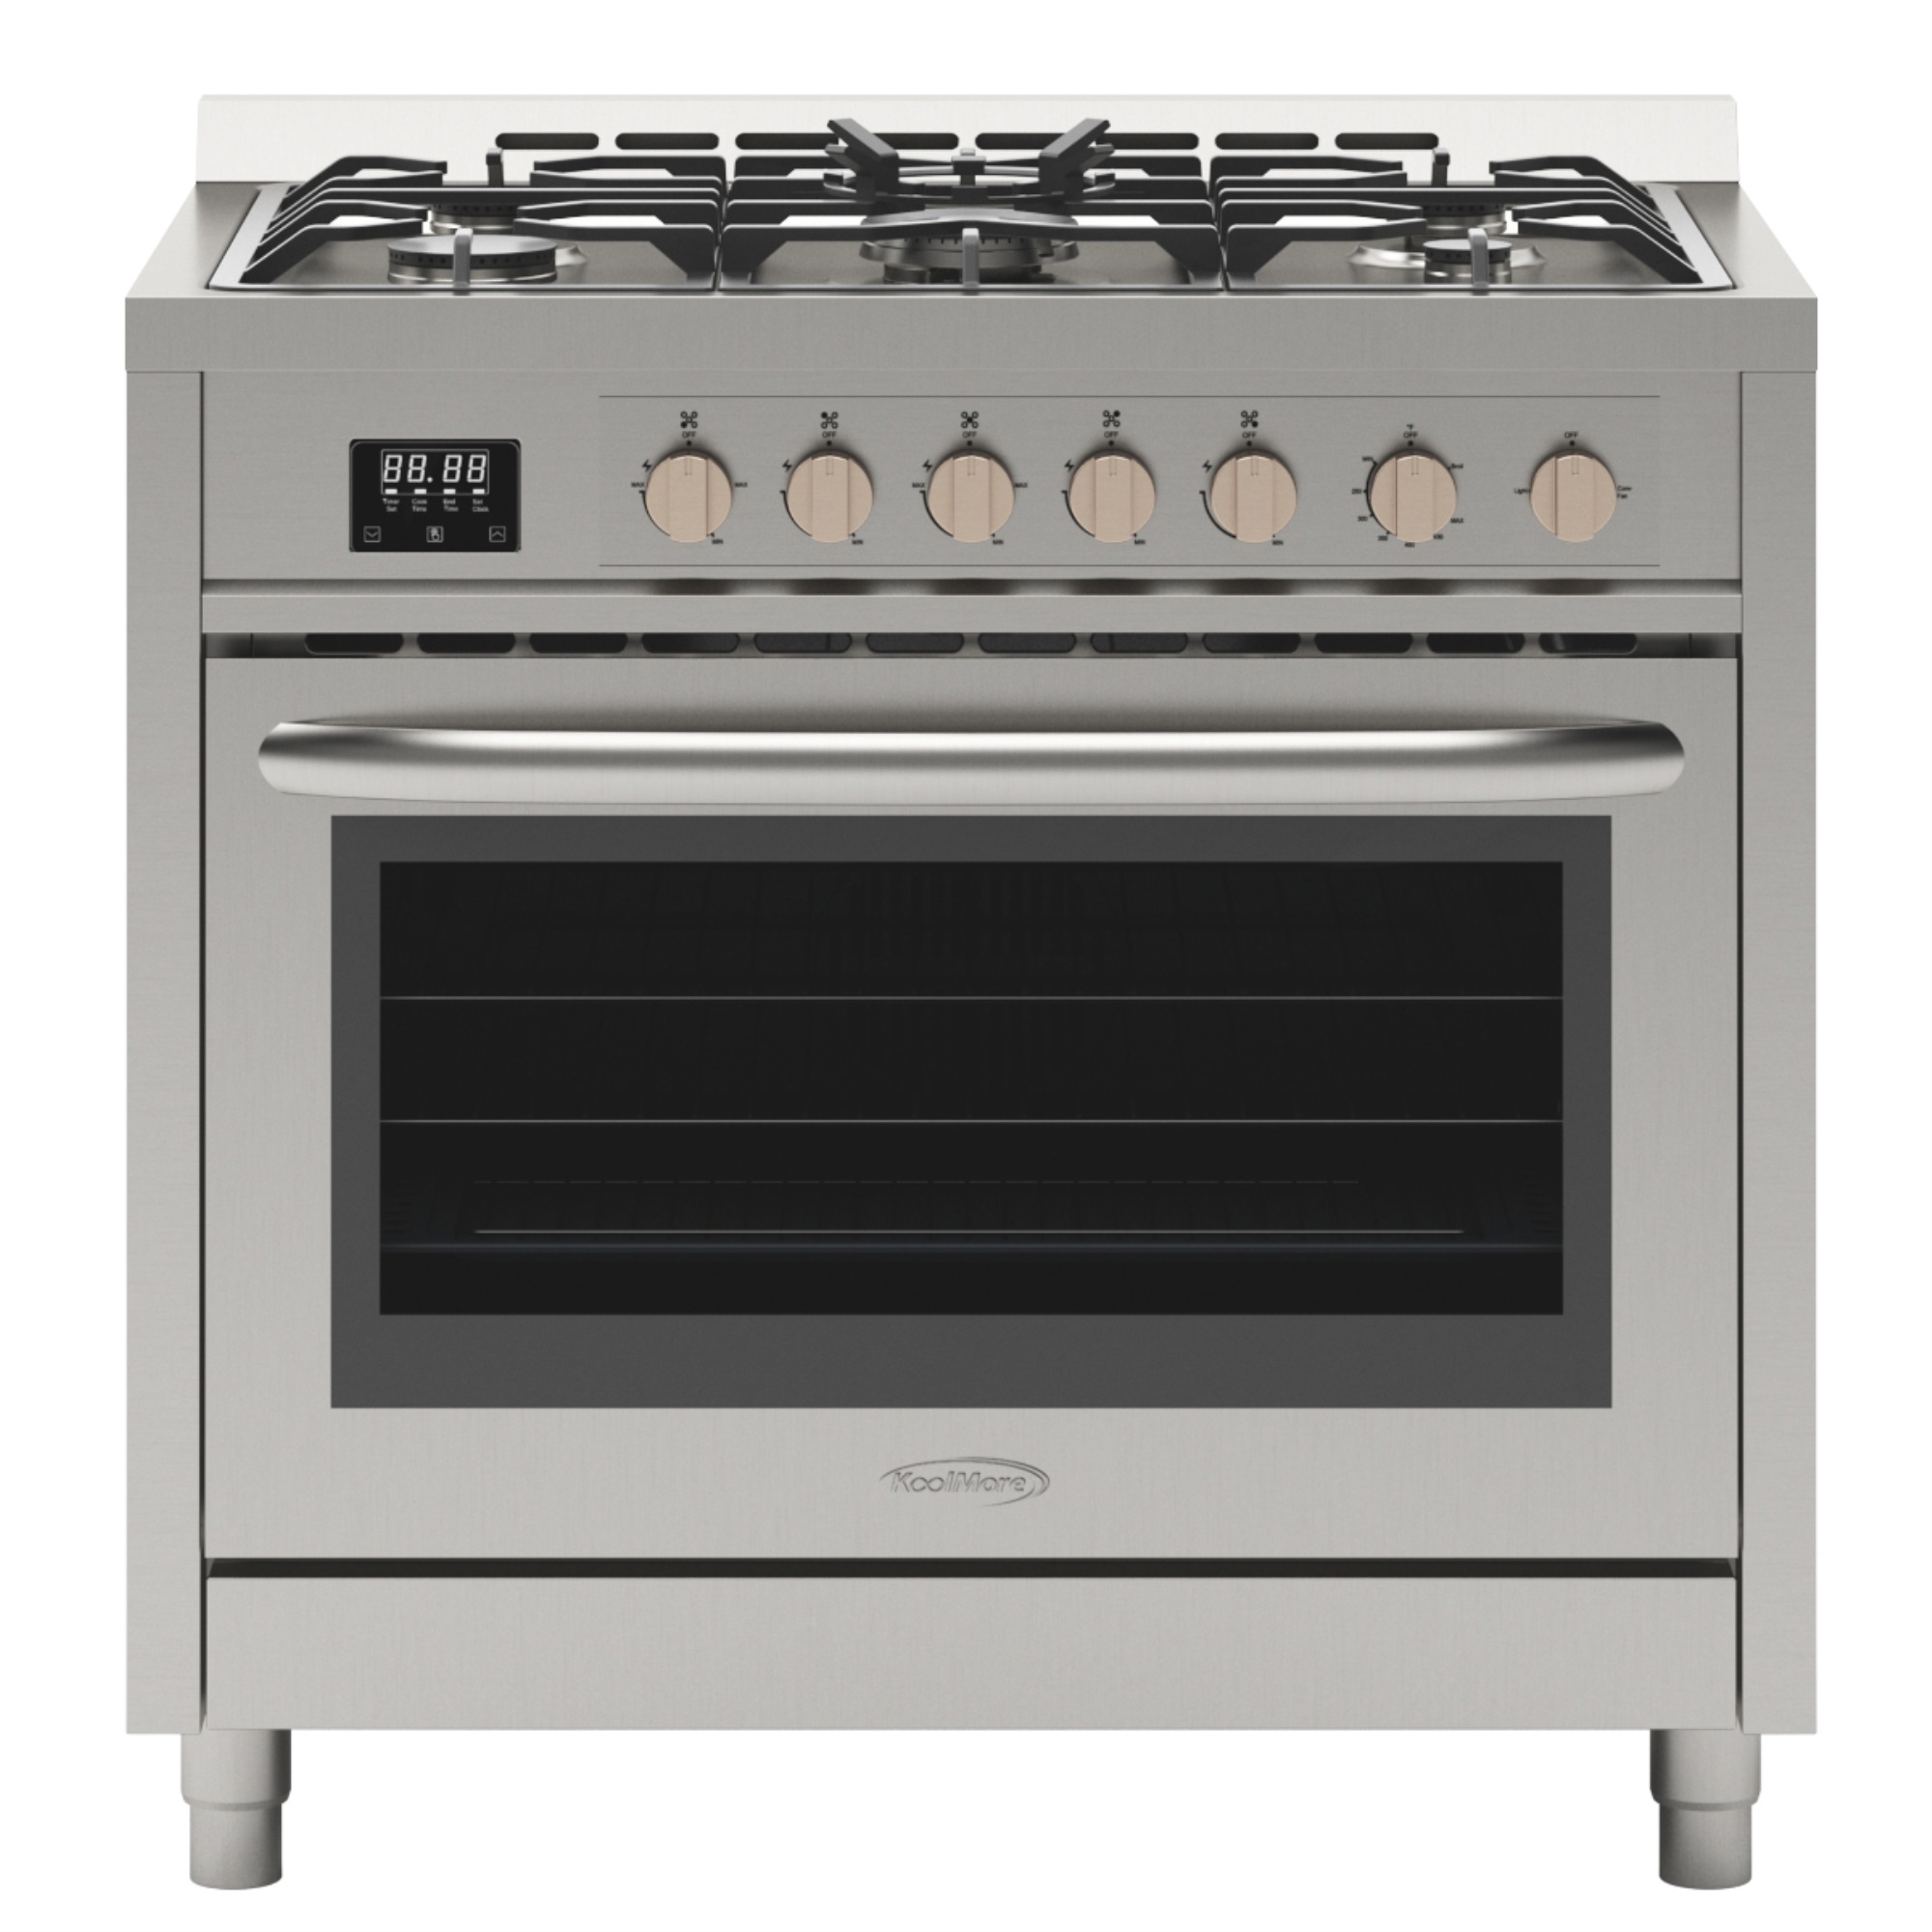 KoolMore 36 Inch Professional Gas range Stainless Steel with Legs